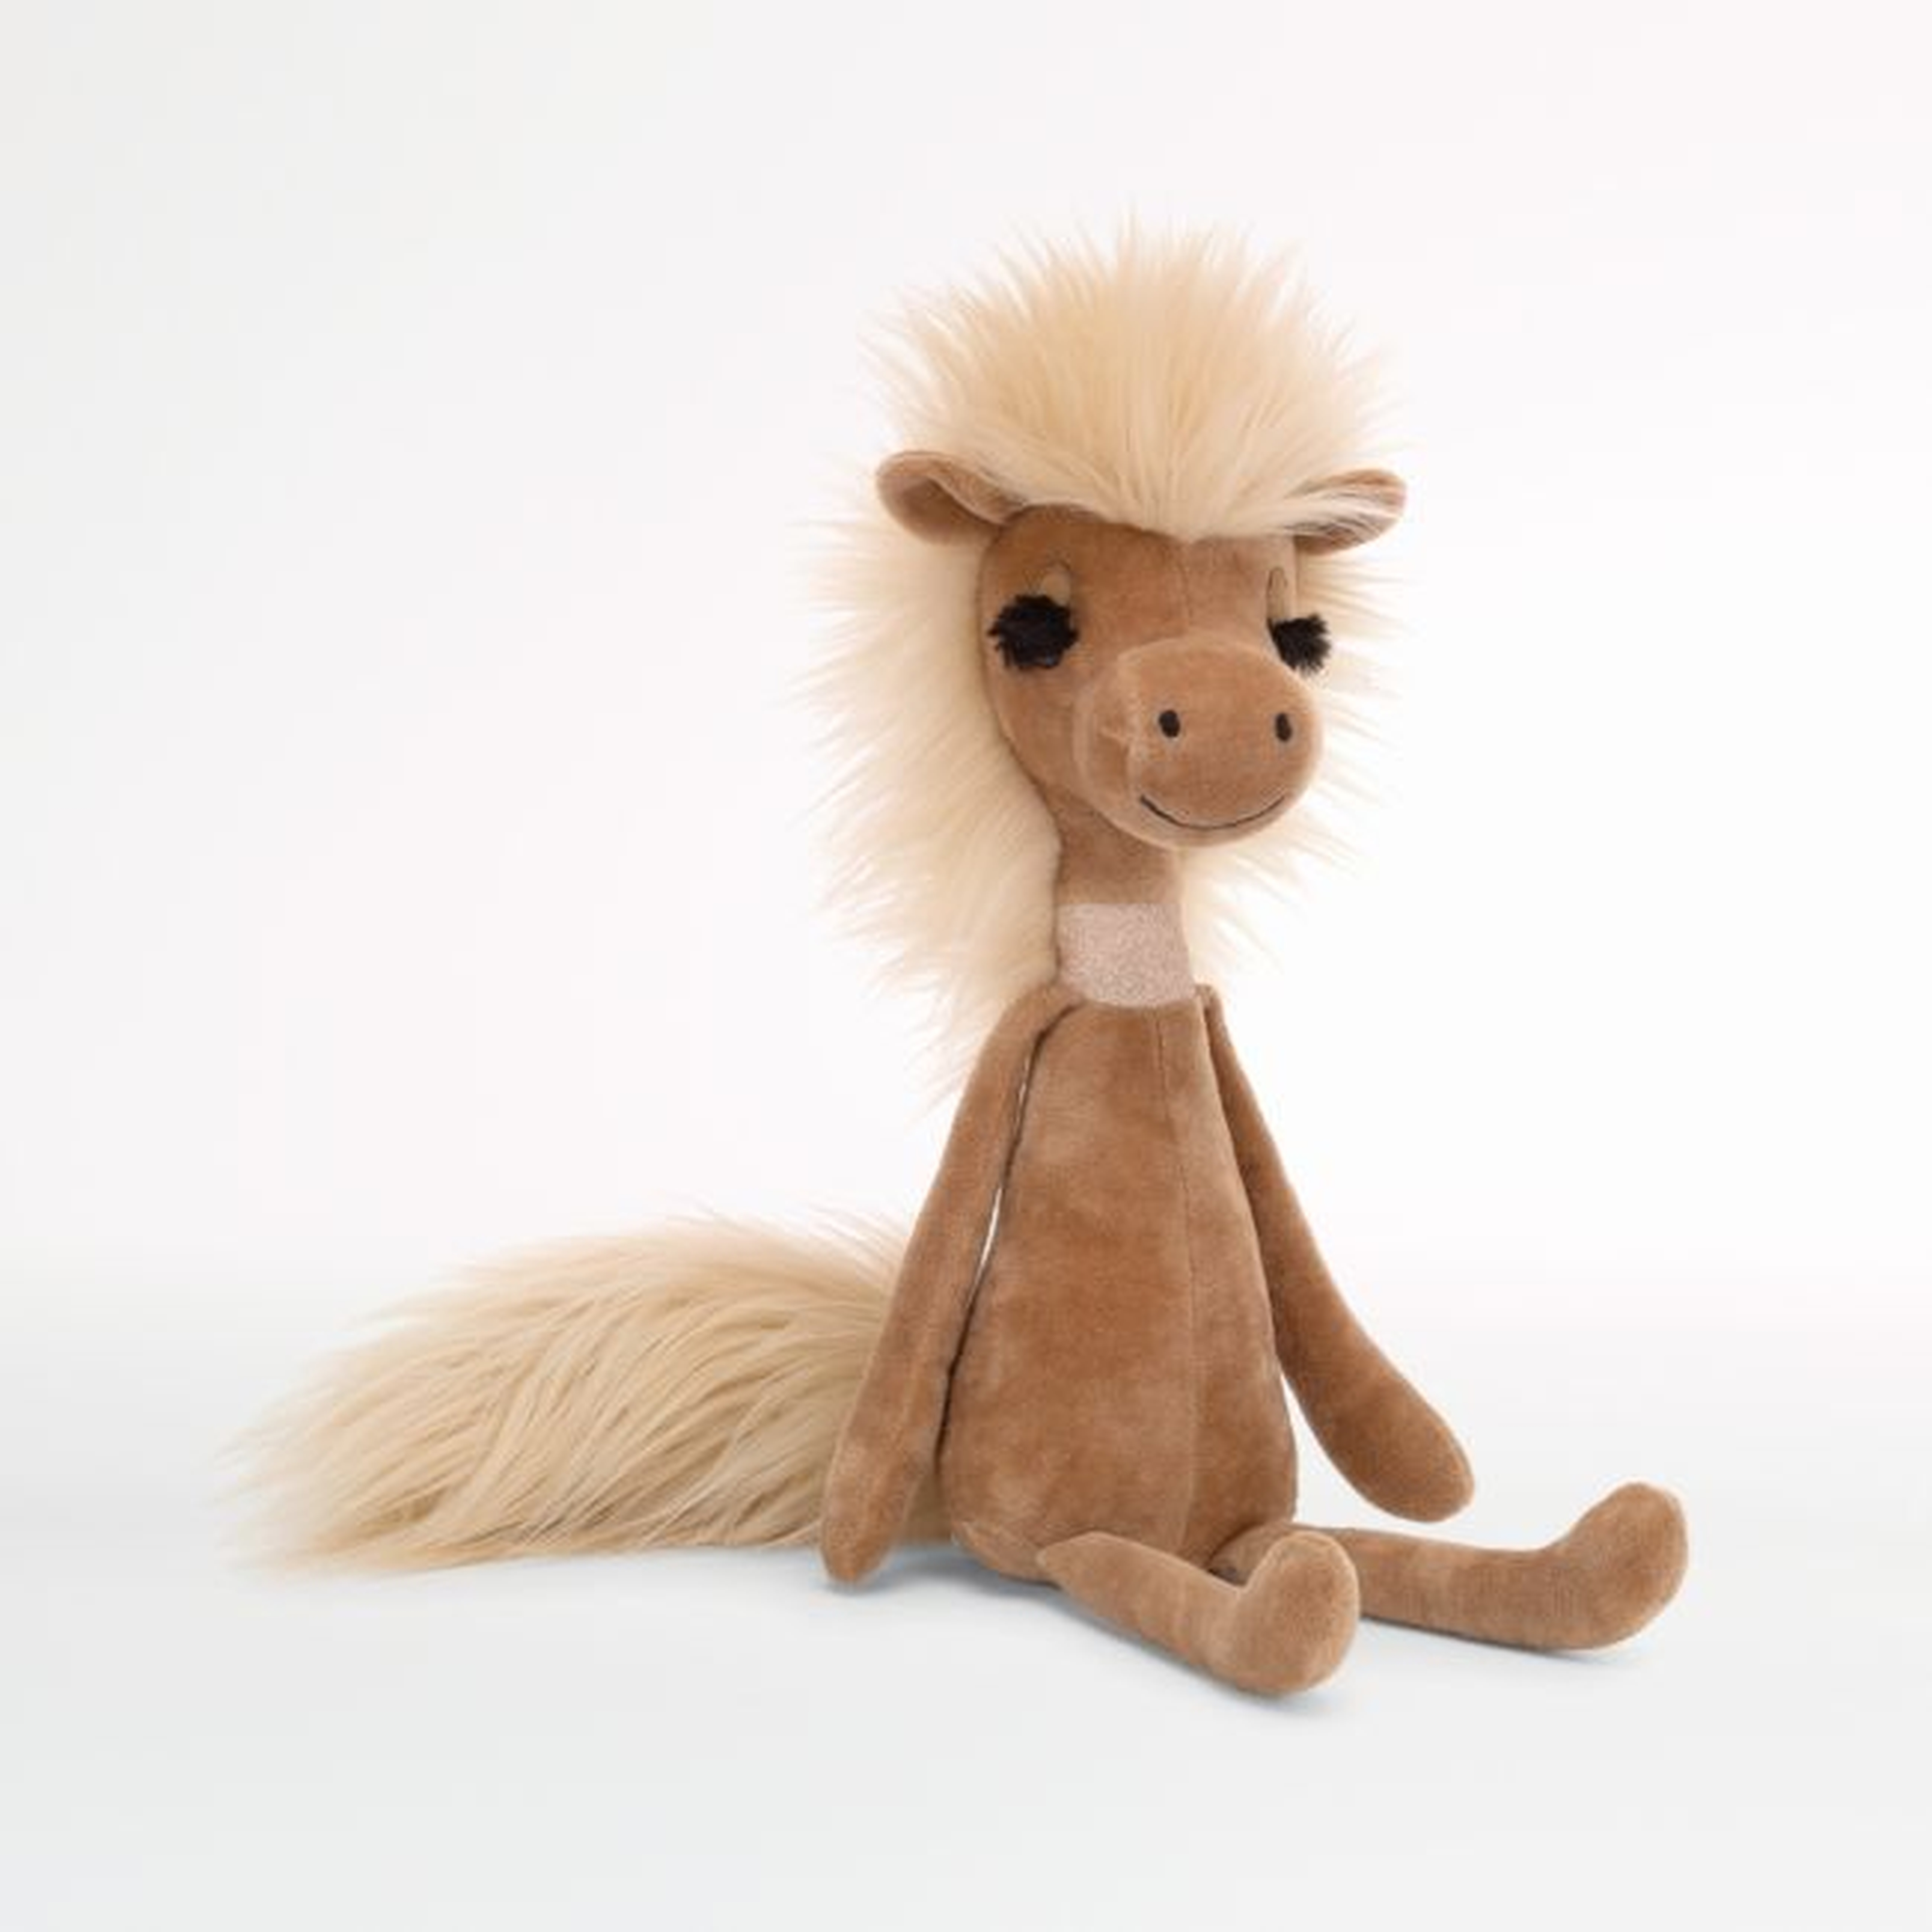 Jellycat ® Swellegant Willow Horse - Crate and Barrel